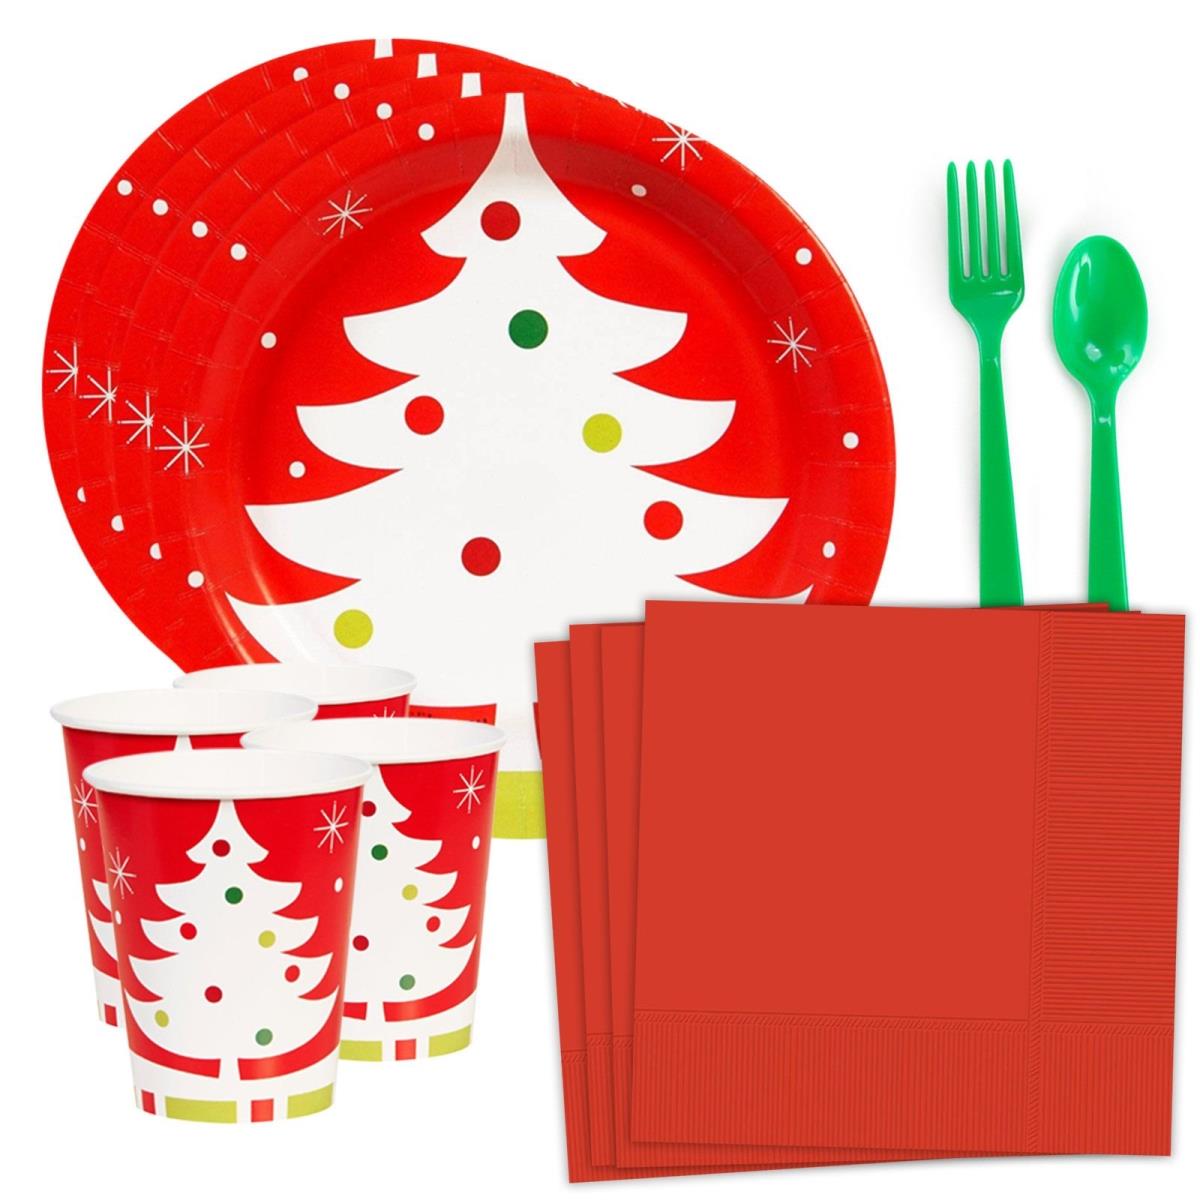 Picture of Costume Supercenter 609247 Holiday Tree Standard Tableware Kit - Serves 8